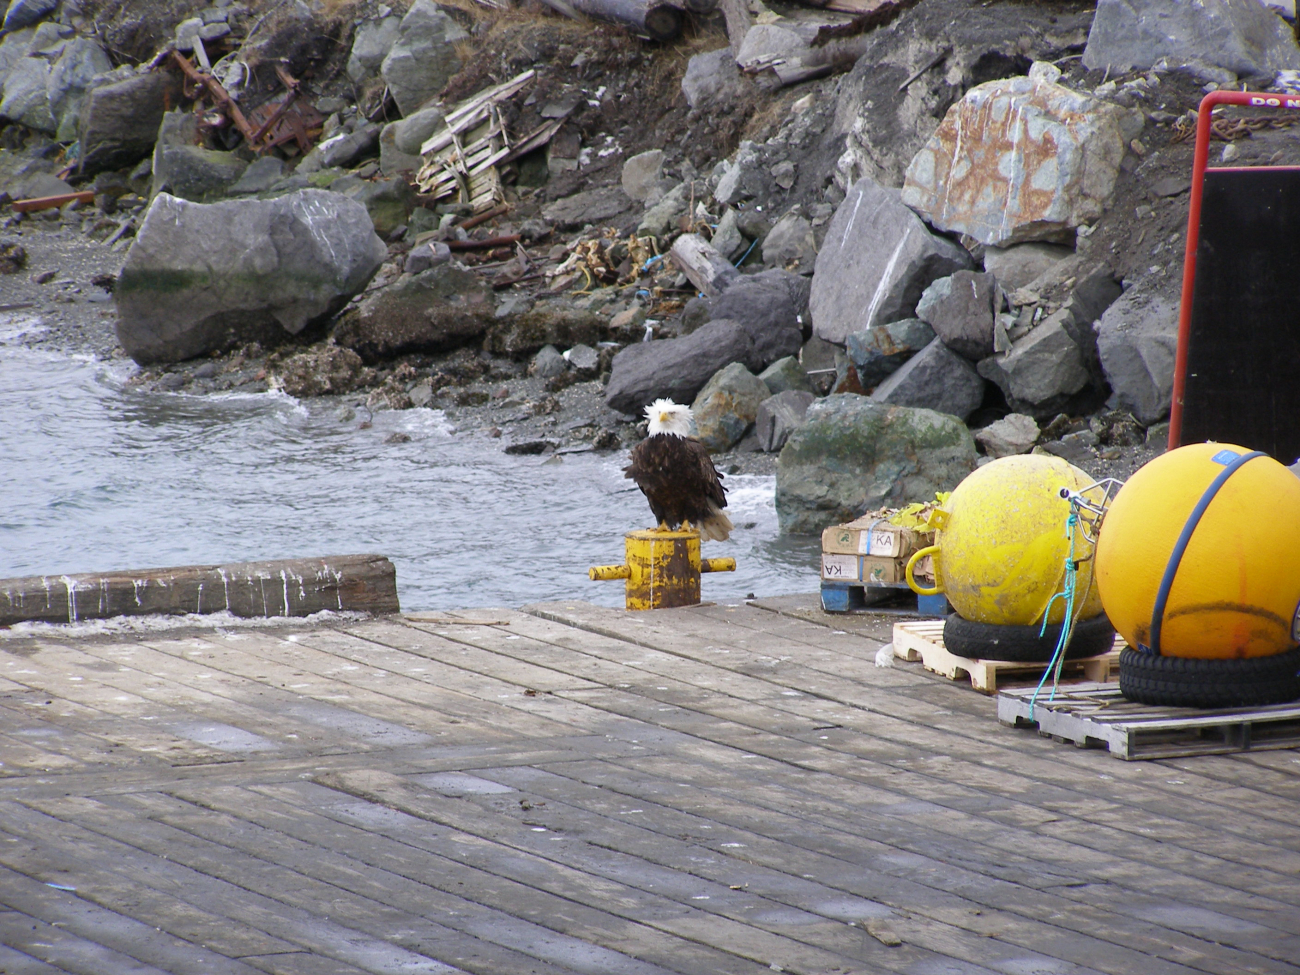 Bald eagle on pier looking like it has its feathers ruffled a bit